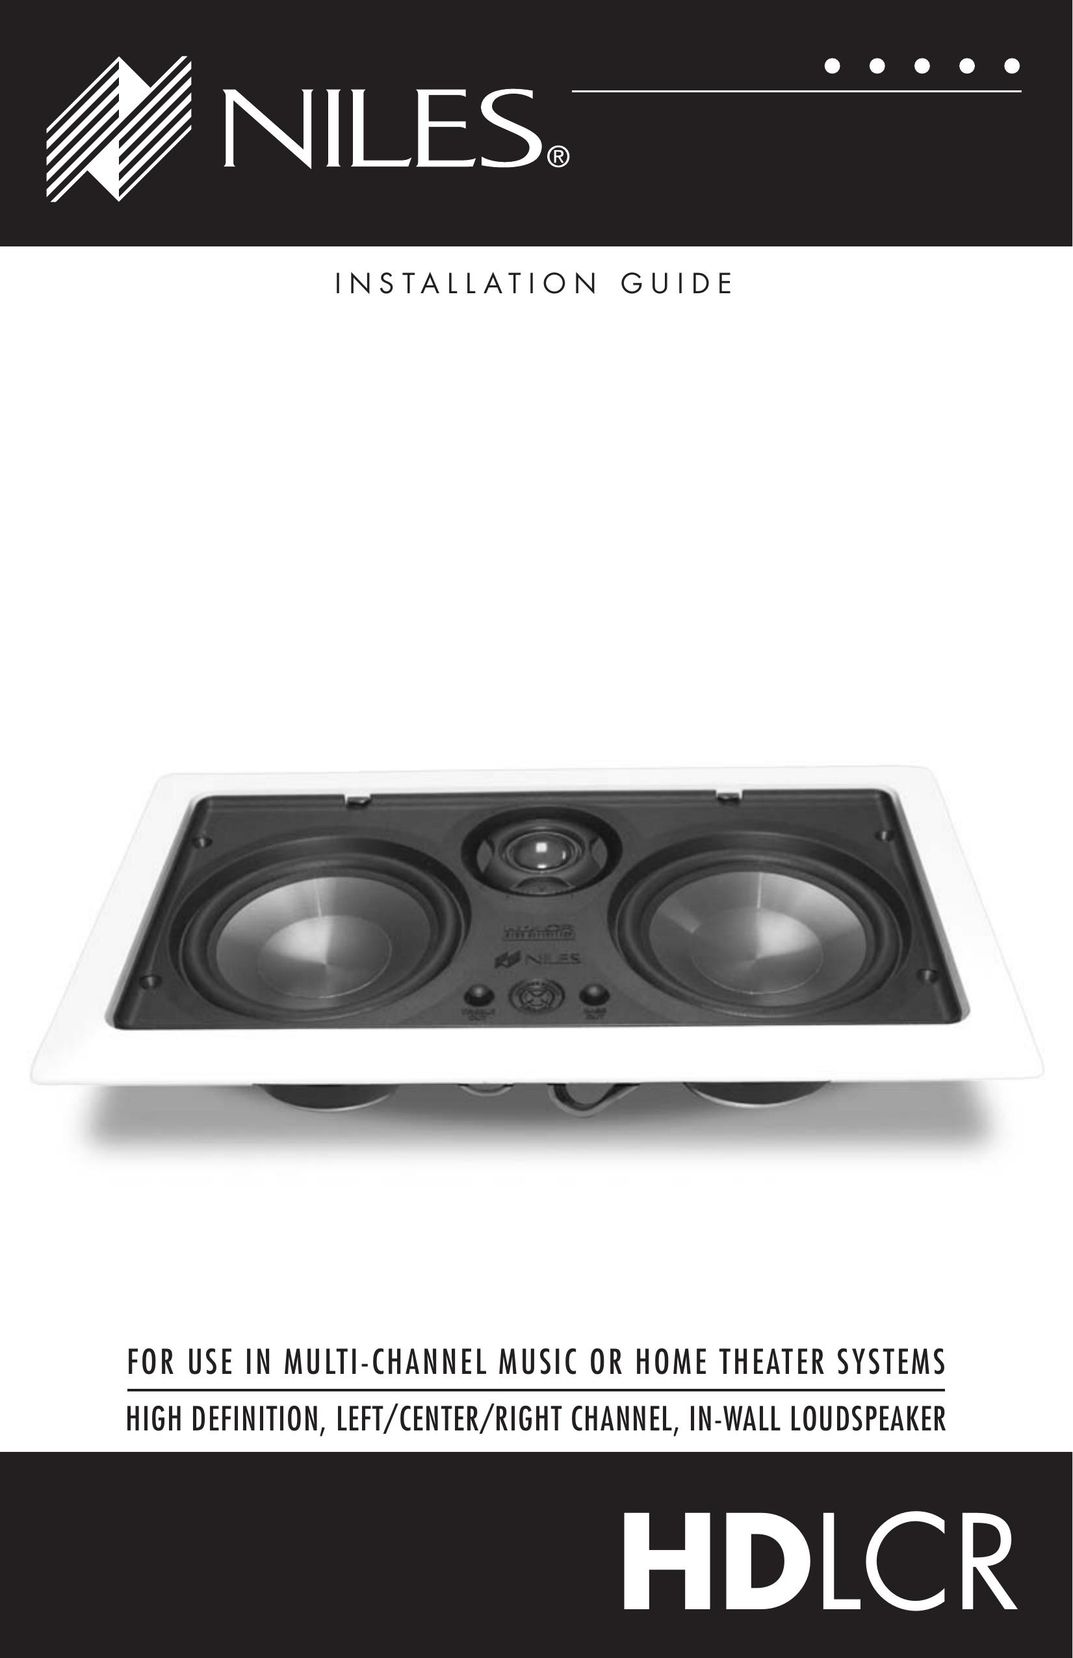 Niles Audio HDLCR Home Theater System User Manual